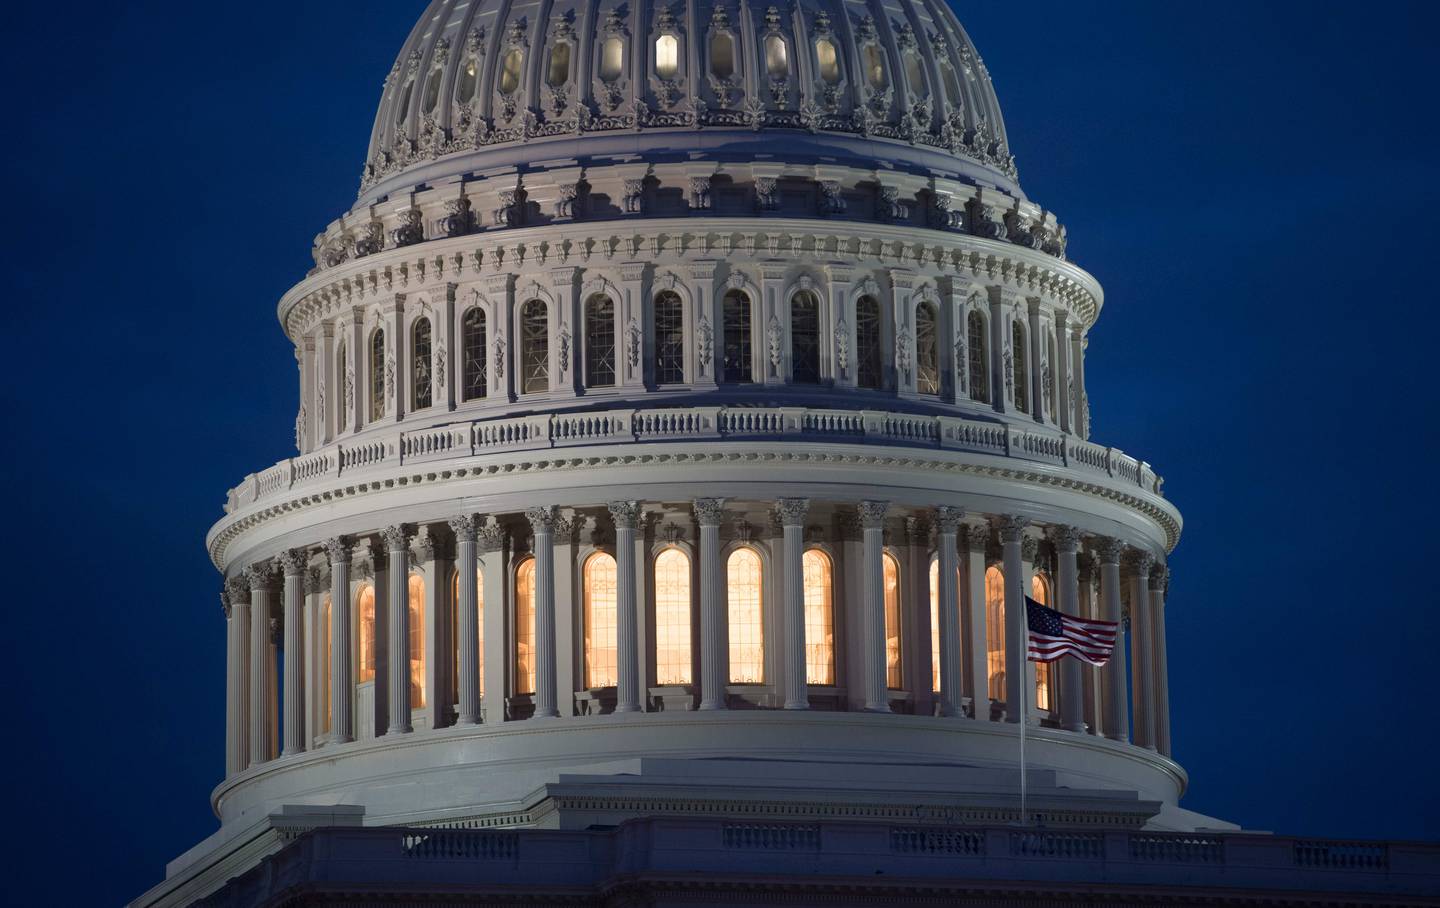 (FILES) In this file photo taken on February 06, 2018 The US Capitol Building is seen at dusk in Washington, DC. - Armenia rejoiced but Turkey was furious on October 30, 2019 after the US House of Representatives passed a historic resolution recognizing mass killings of Armenians a century ago as genocide. With tensions already high over Turkey's assault on Kurdish-controlled areas of northern Syria, US lawmakers voted 405 to 11 on Tuesday in support of the measure to "commemorate the Armenian Genocide through official recognition and remembrance."The move was a first for the US Congress, where similar measures with such direct language have been introduced for decades but never passed. (Photo by SAUL LOEB / AFP)